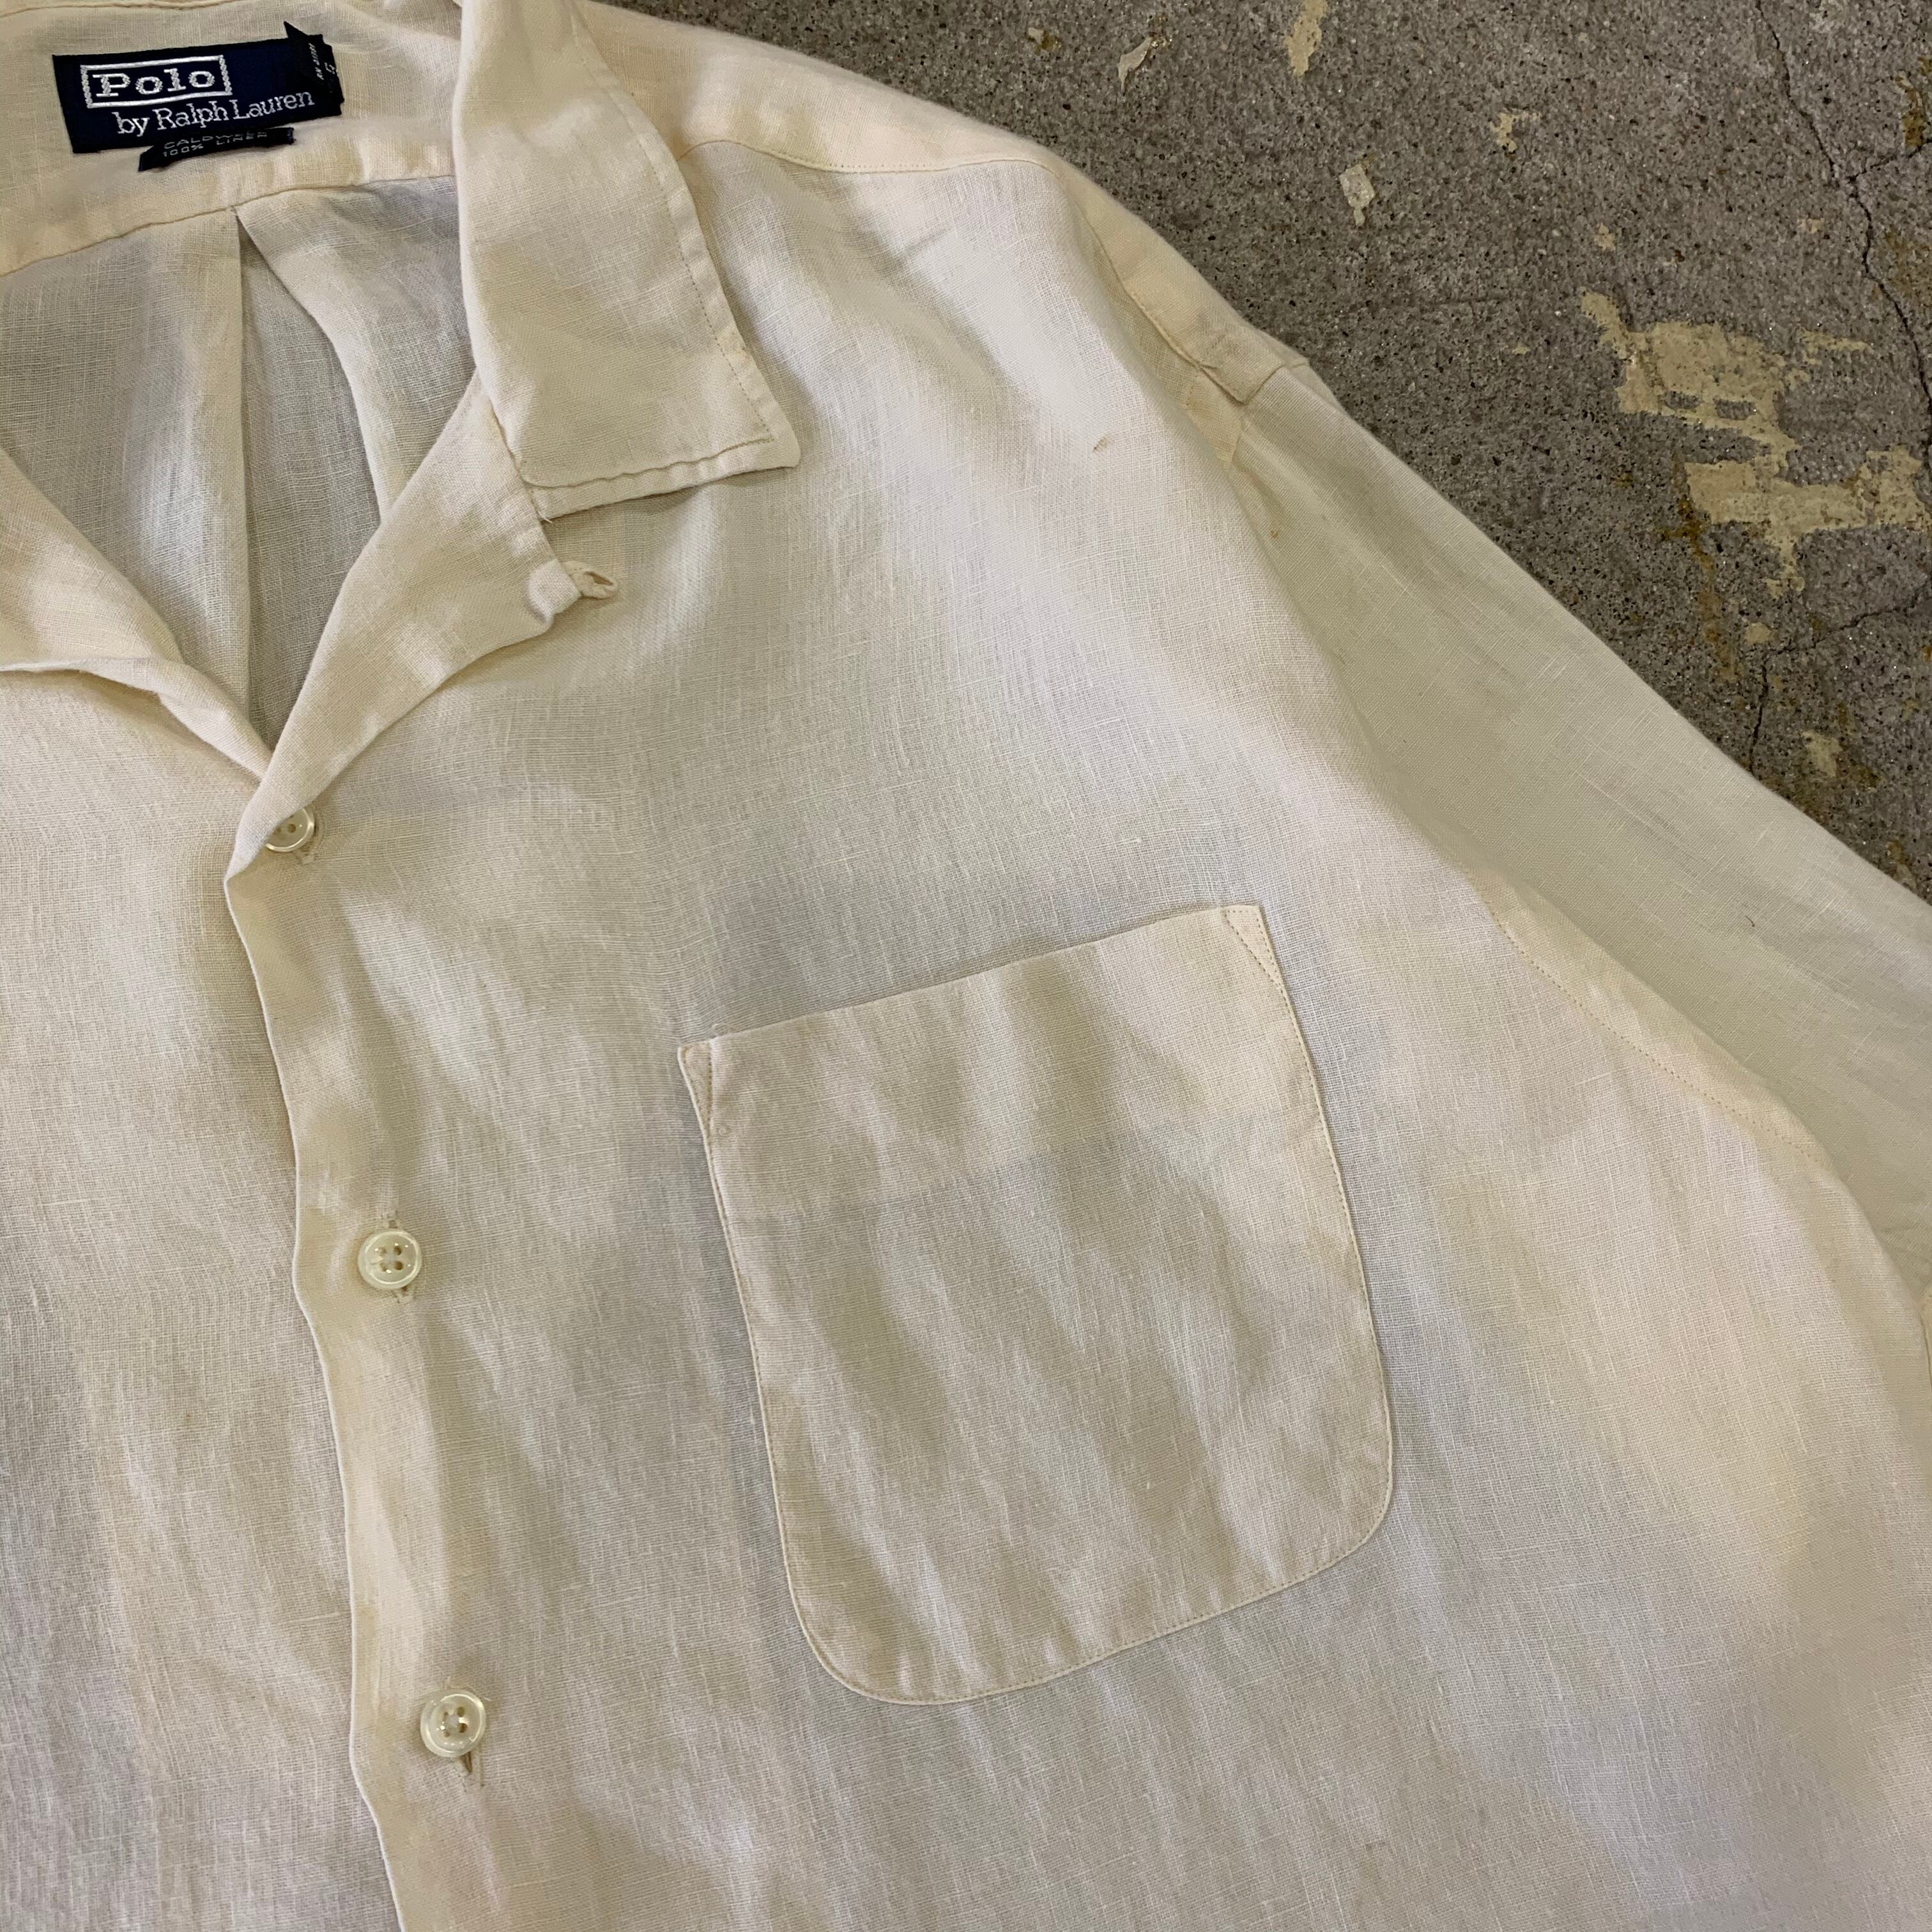 90s Polo Ralph Lauren S/S linen shirt | What’z up powered by BASE